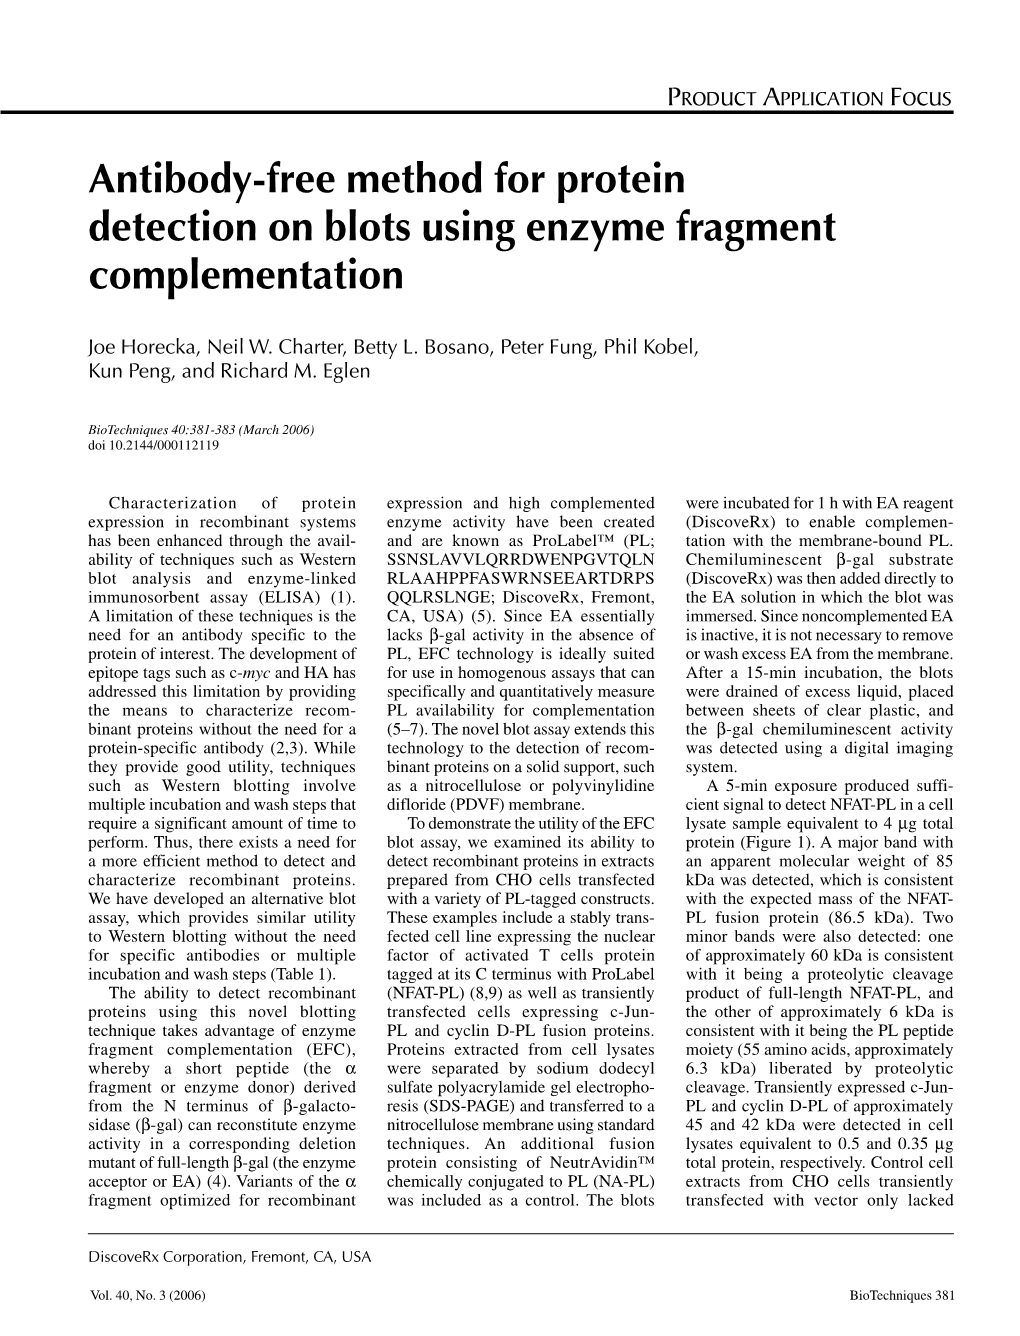 Antibody-Free Method for Protein Detection on Blots Using Enzyme Fragment Complementation